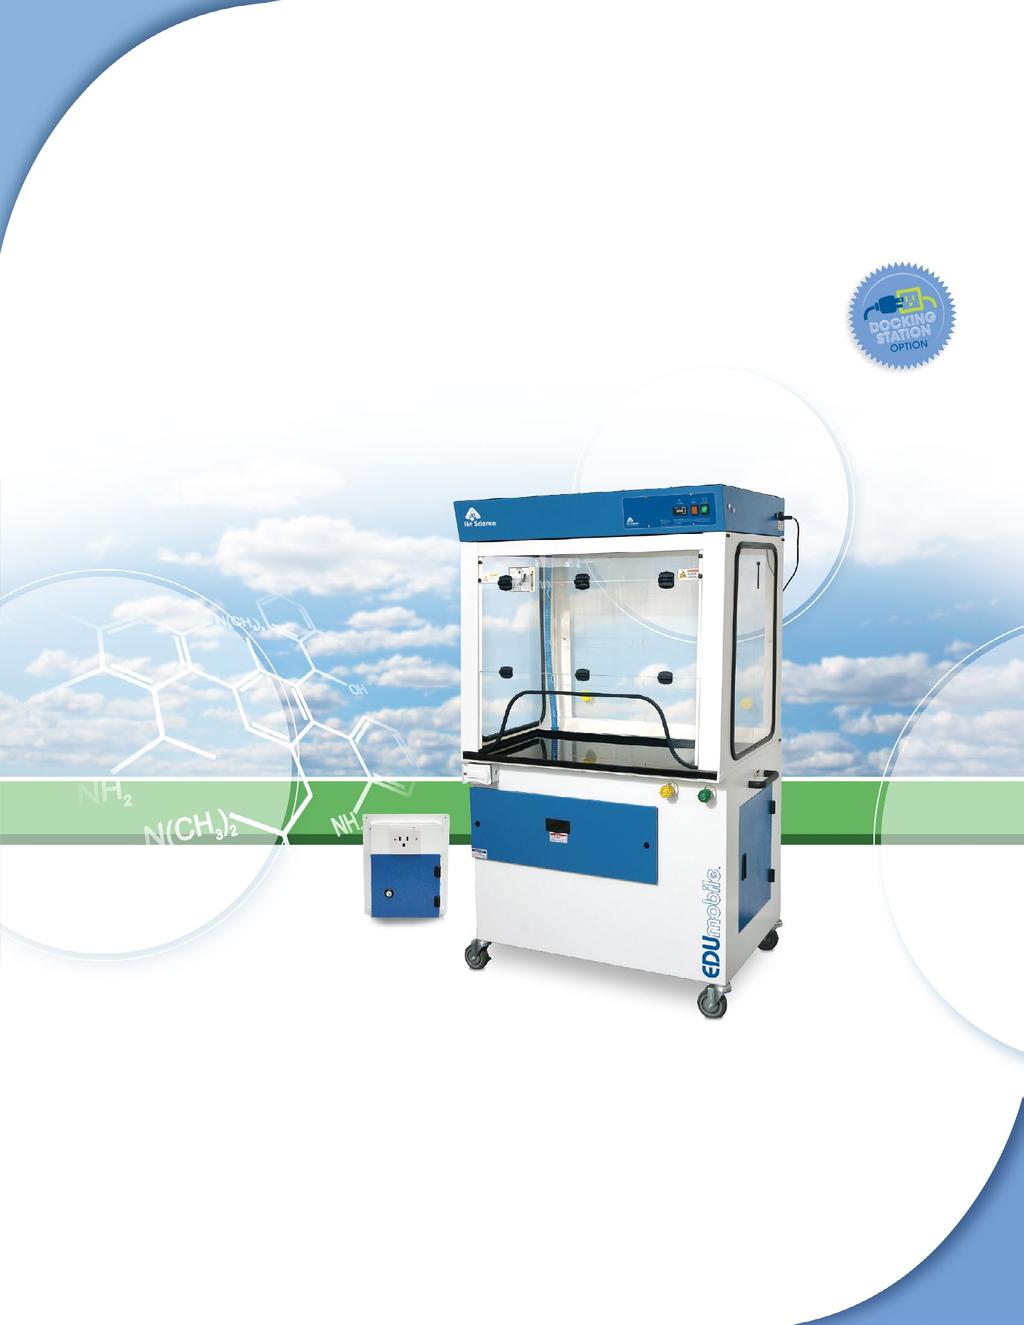 Ductless Demonstration Fume Hoods The World s Most Extensive Selection of Ductless Fume Hoods. EDU-M-40 Now available with Utility Docking Station.